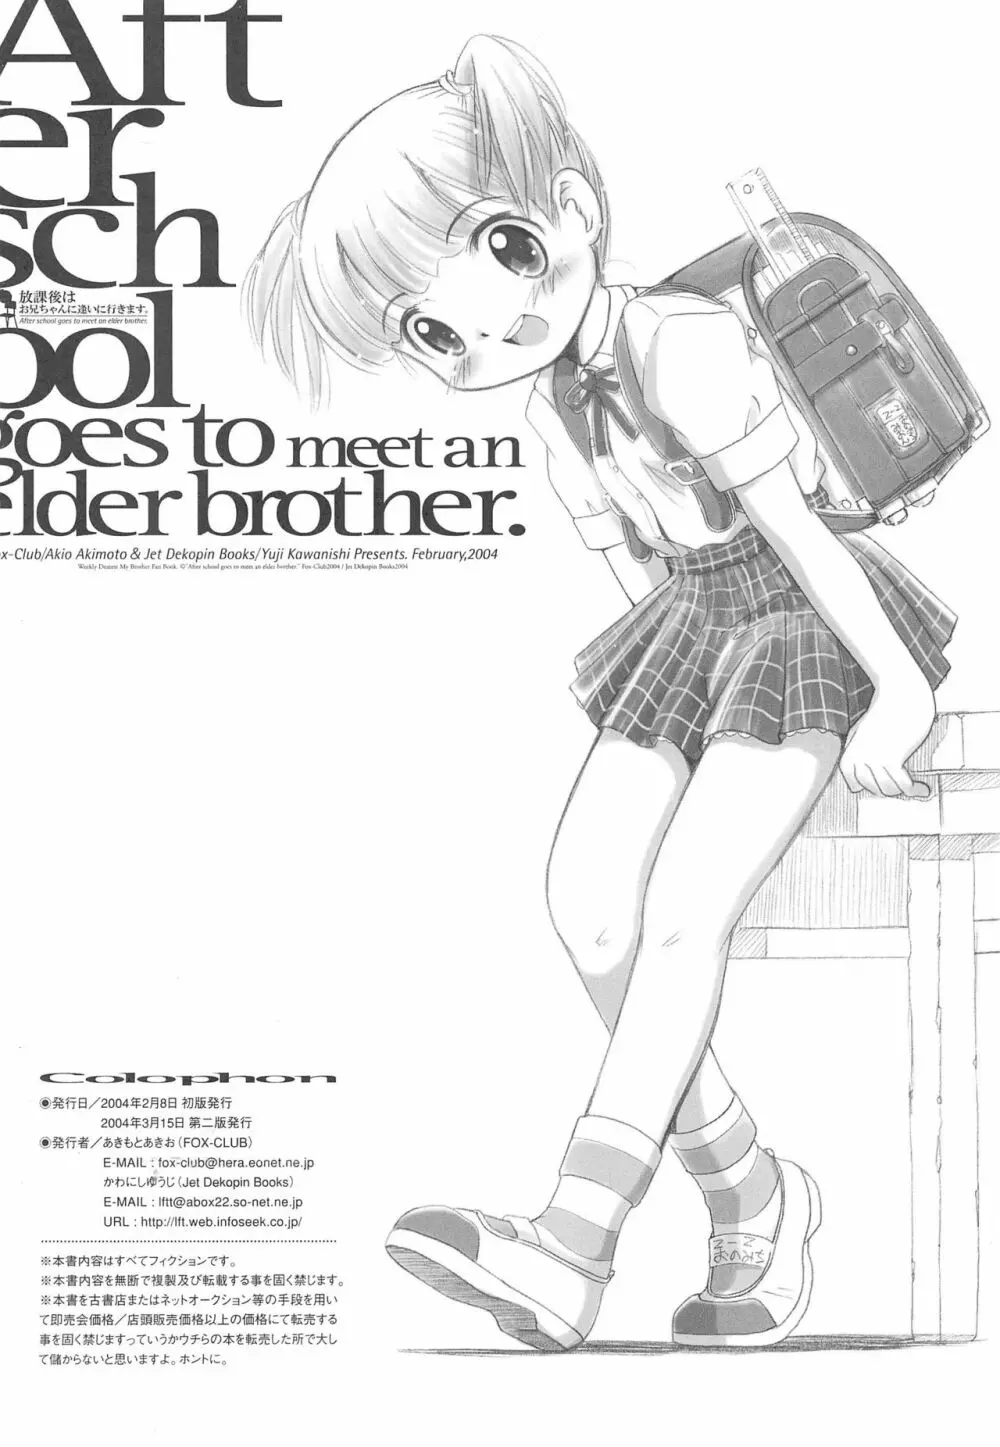 After School Goes To Meet An Elder Brother 放課後はお兄ちゃんに逢いに行きます。 - page8